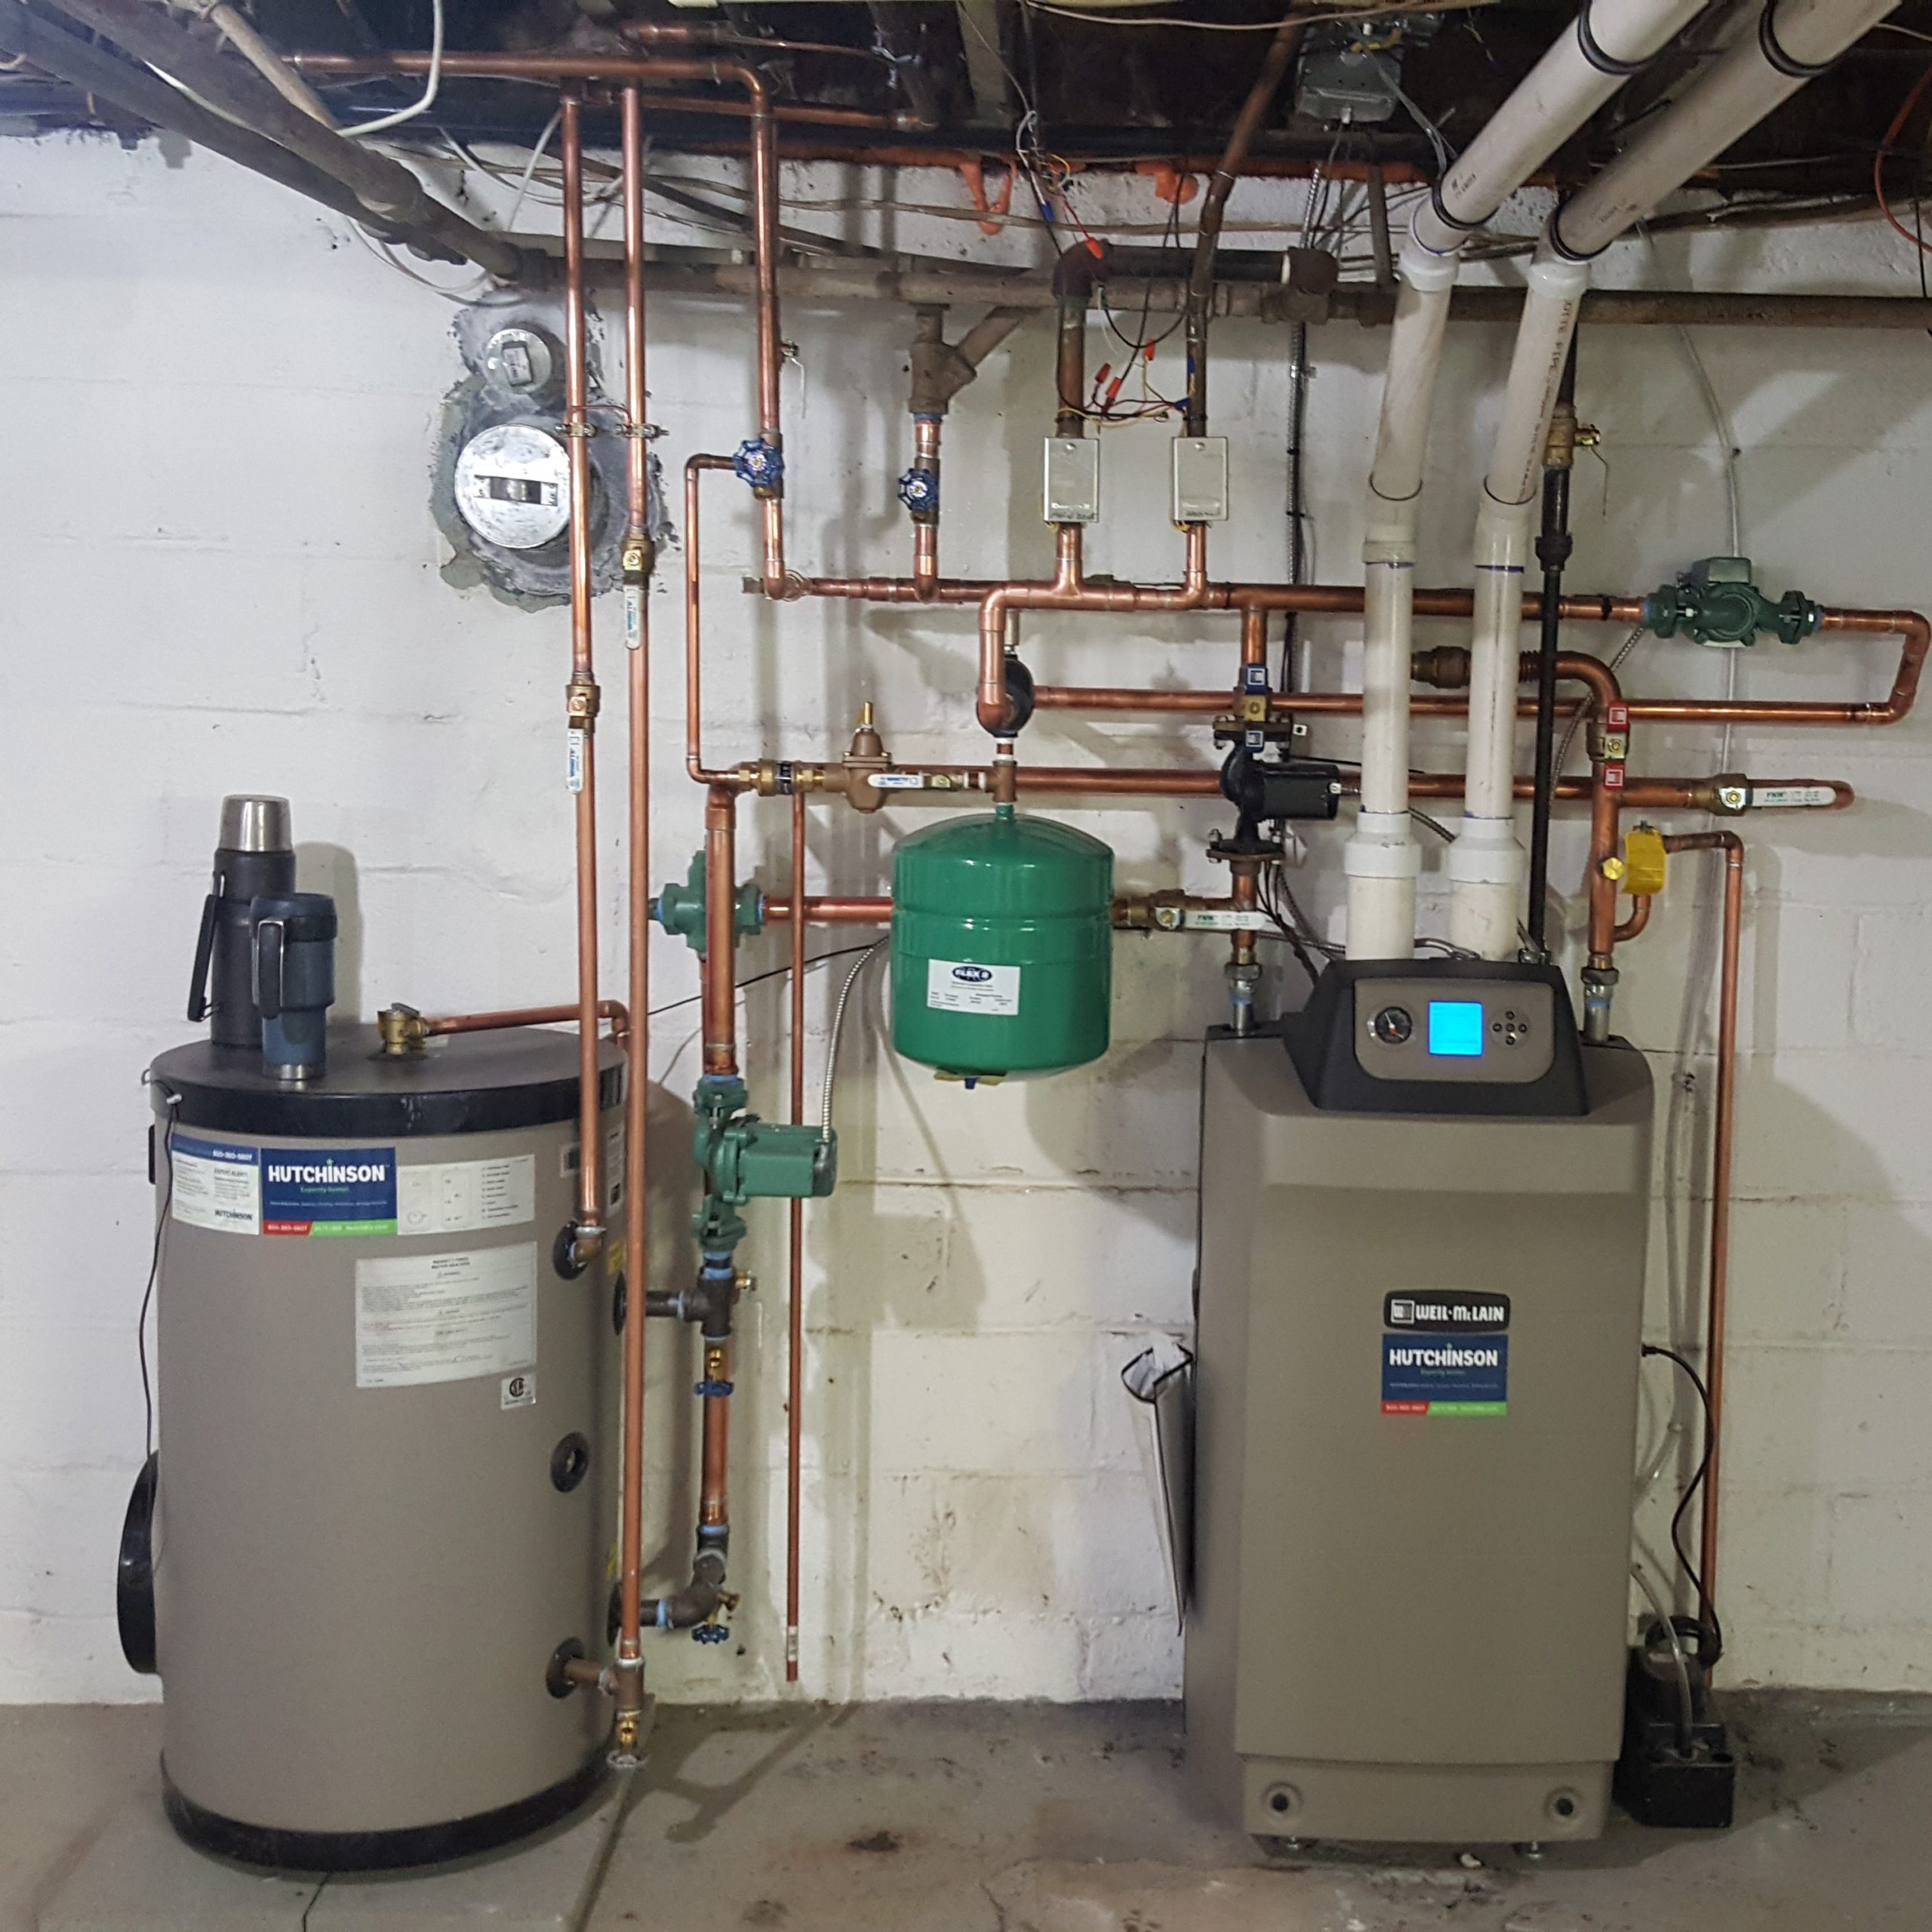 Plumbing, Heating and Air Conditioning Services in Ocean City, NJ